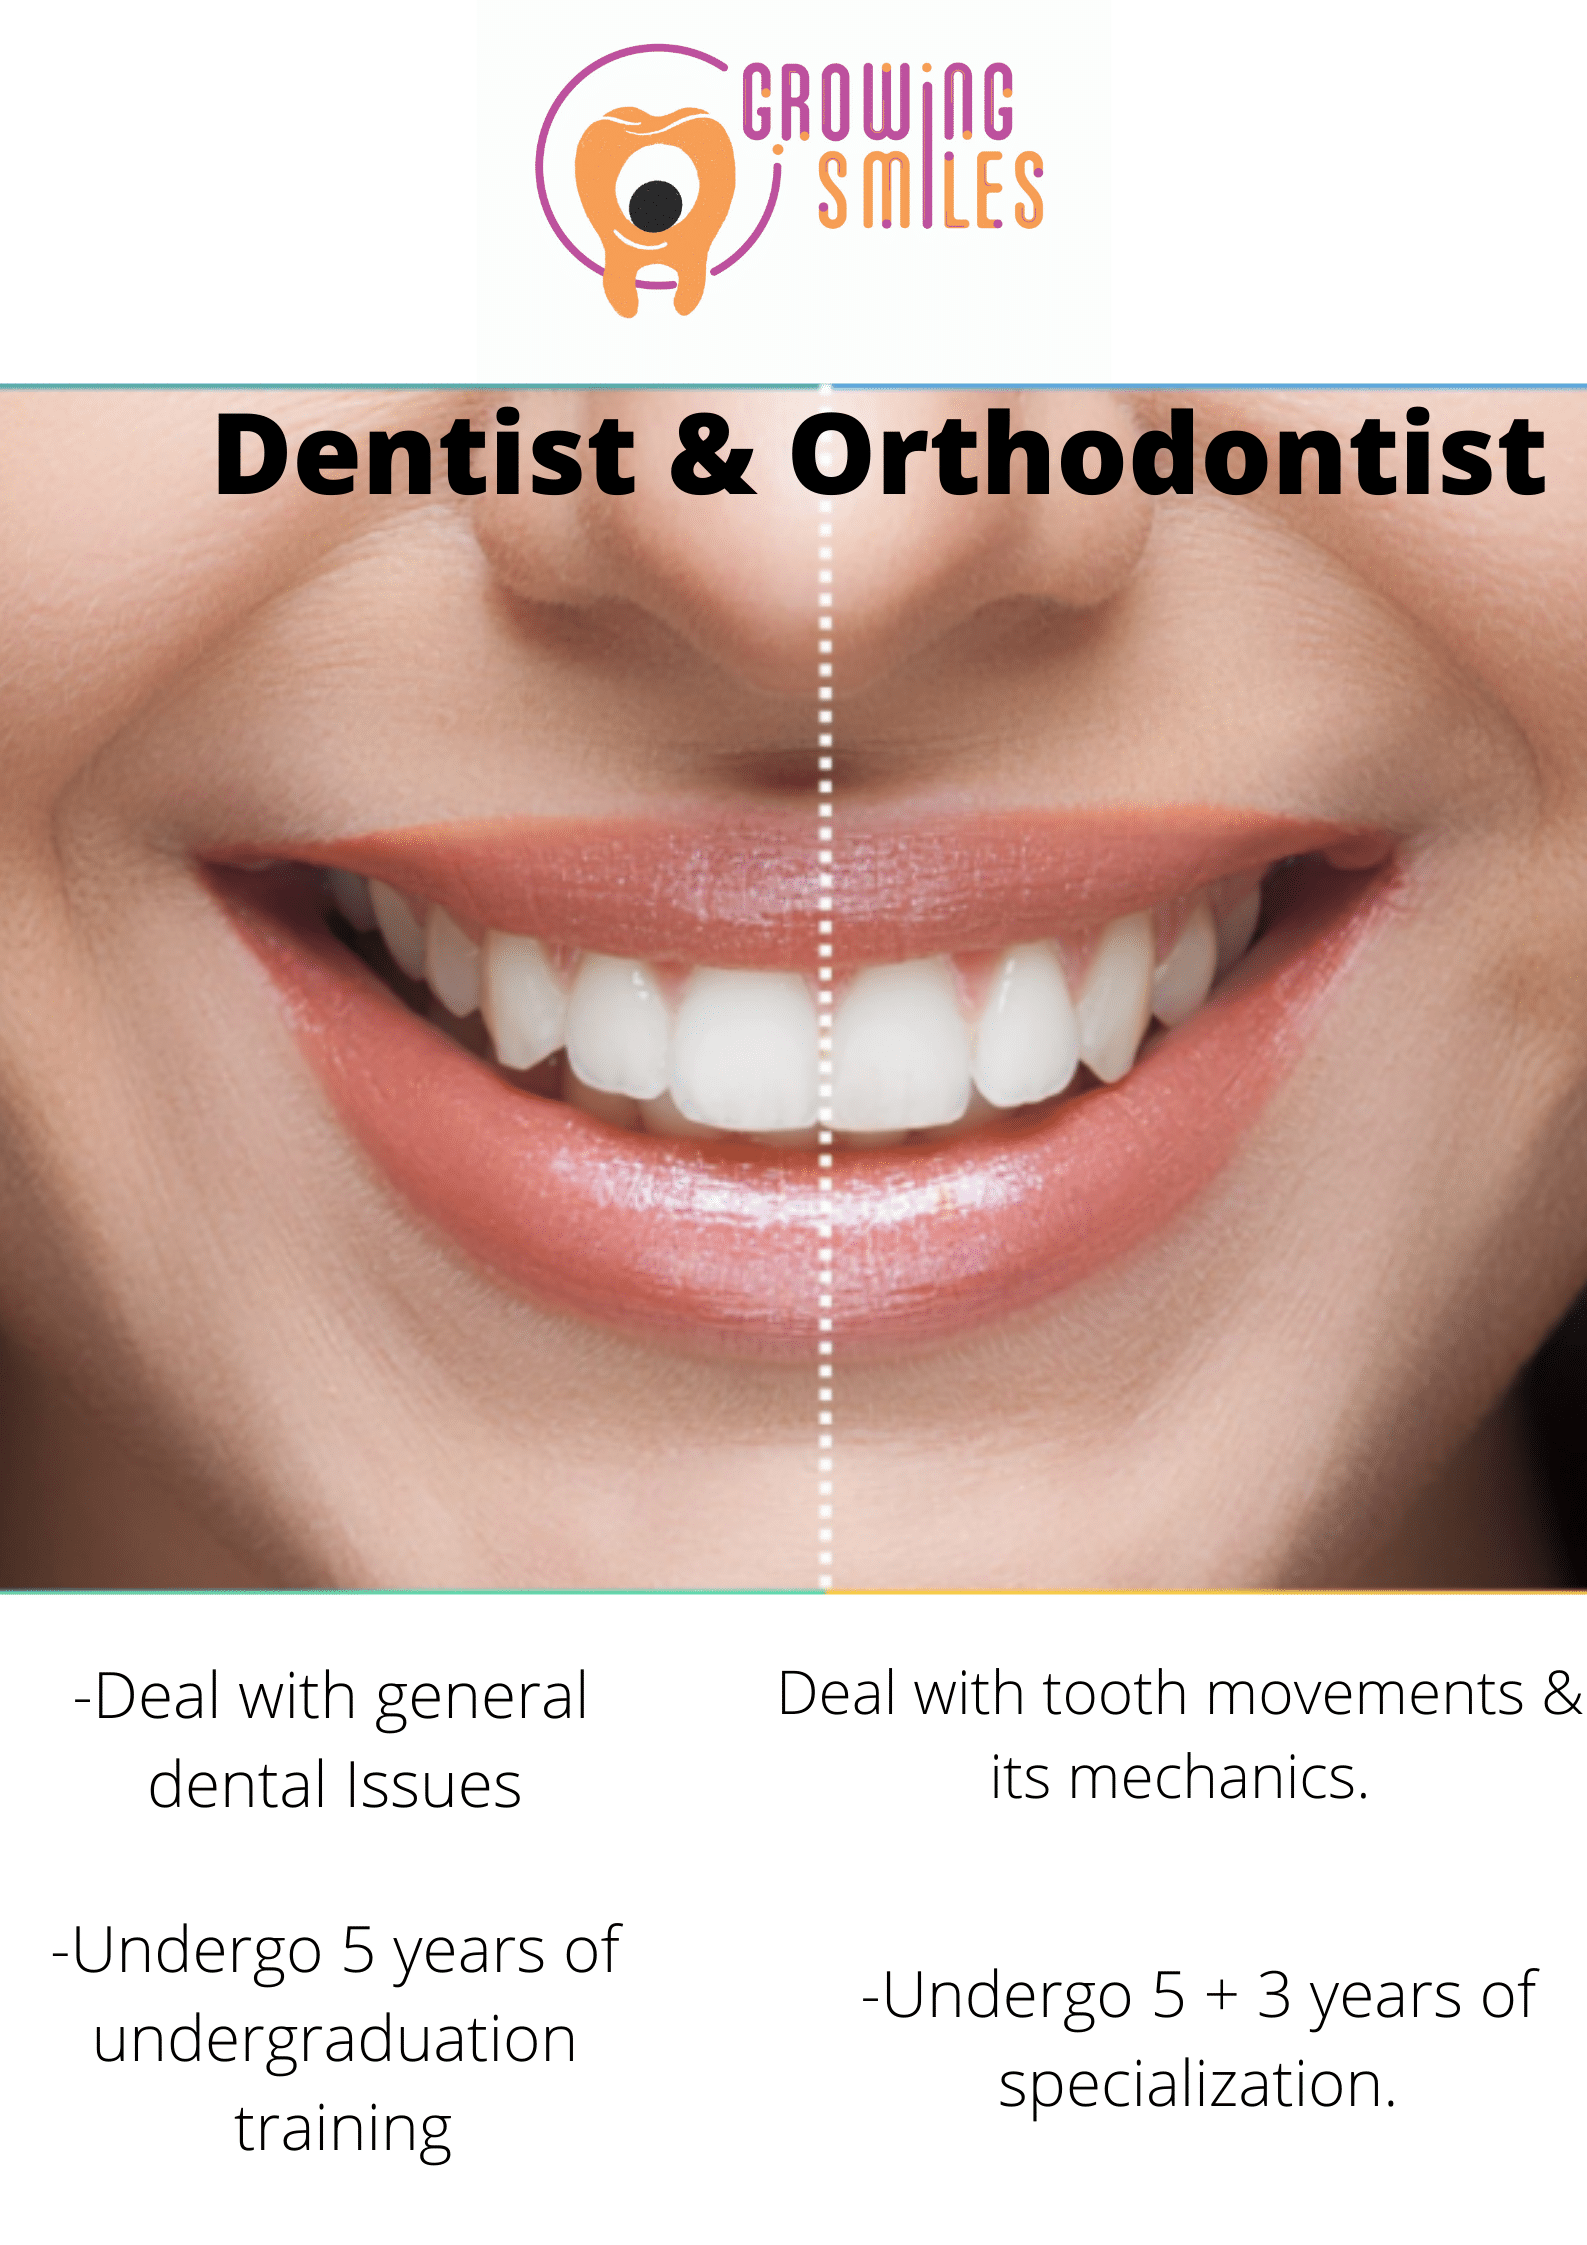 What is the difference between an orthodontist and a general dentist?